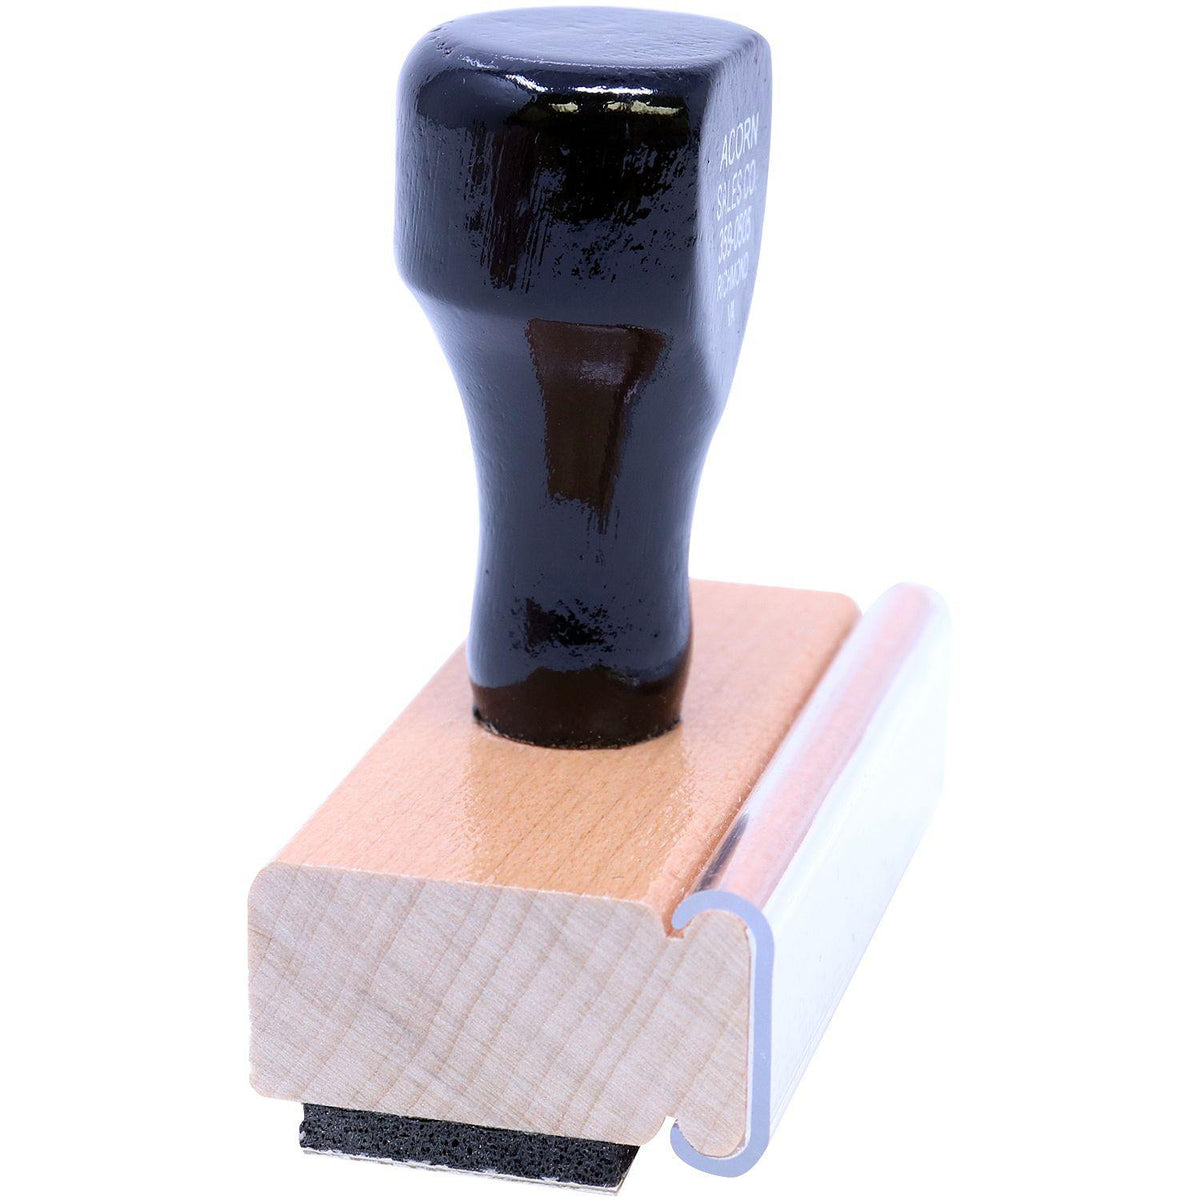 Side View of Large Please Forward Attending Physicians Rubber Stamp at an Angle